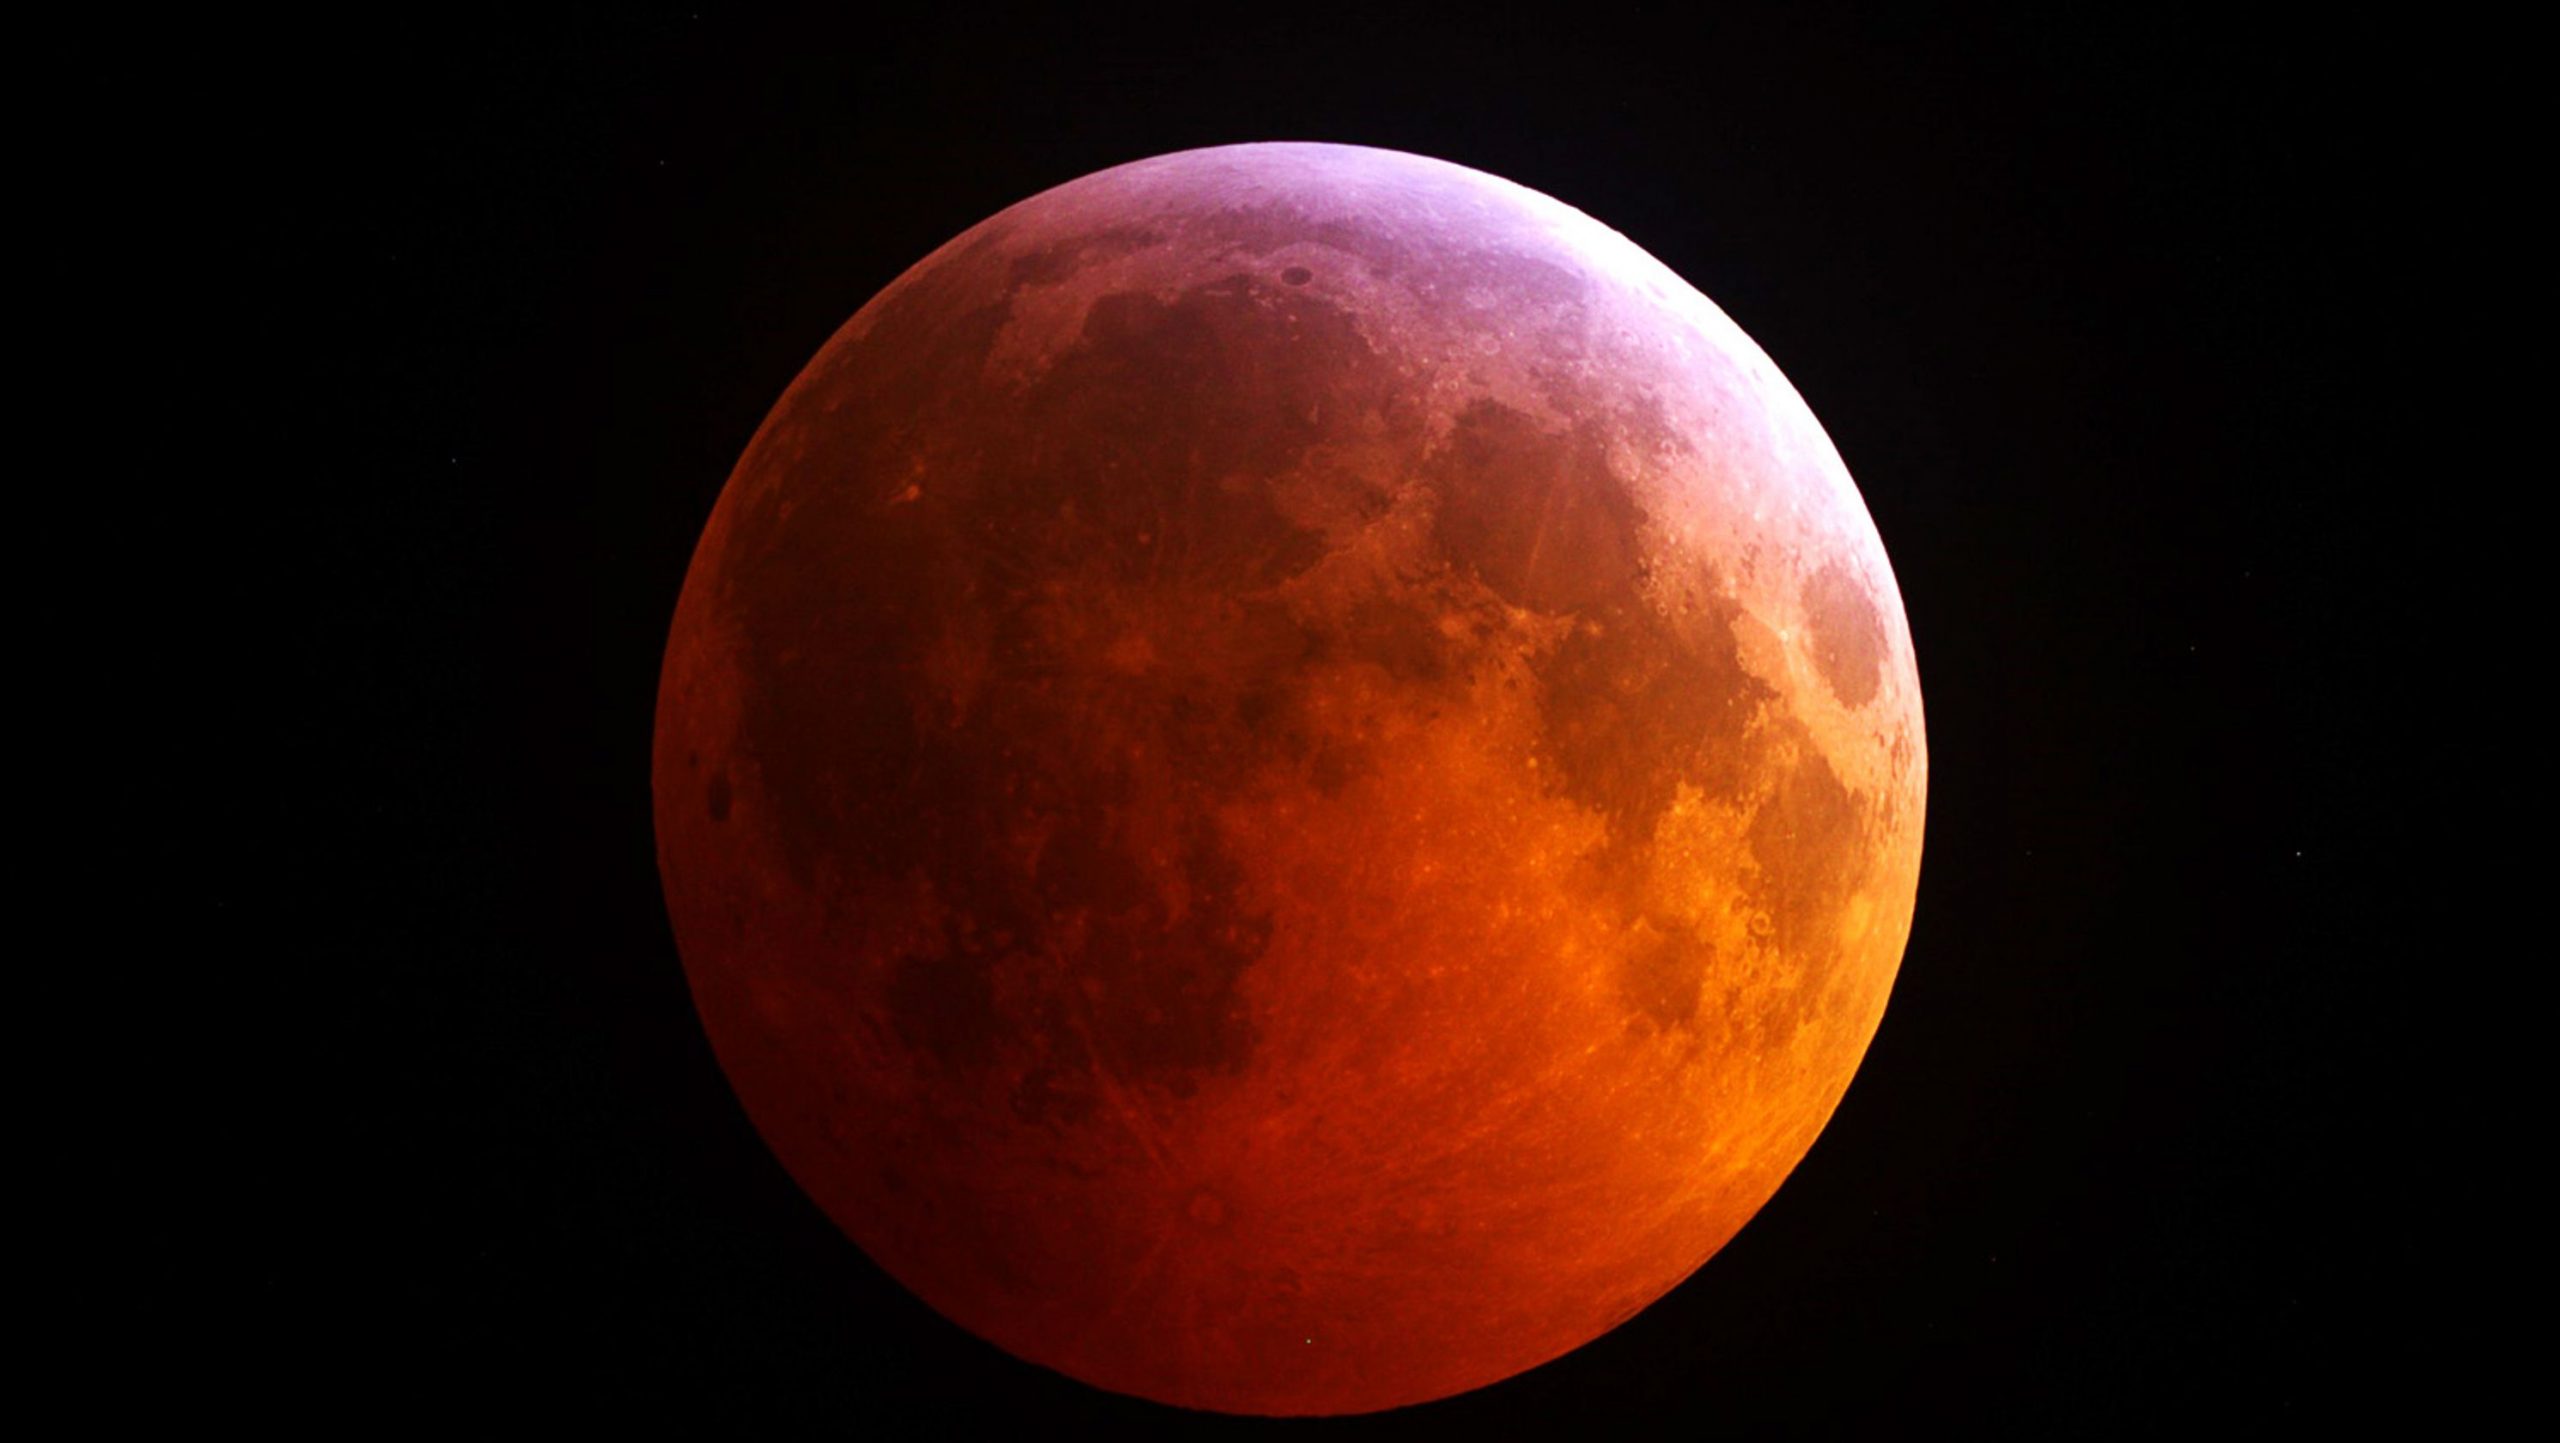 Nigeria Will Experience A Lunar Eclipse On Monday, January 21, 2019